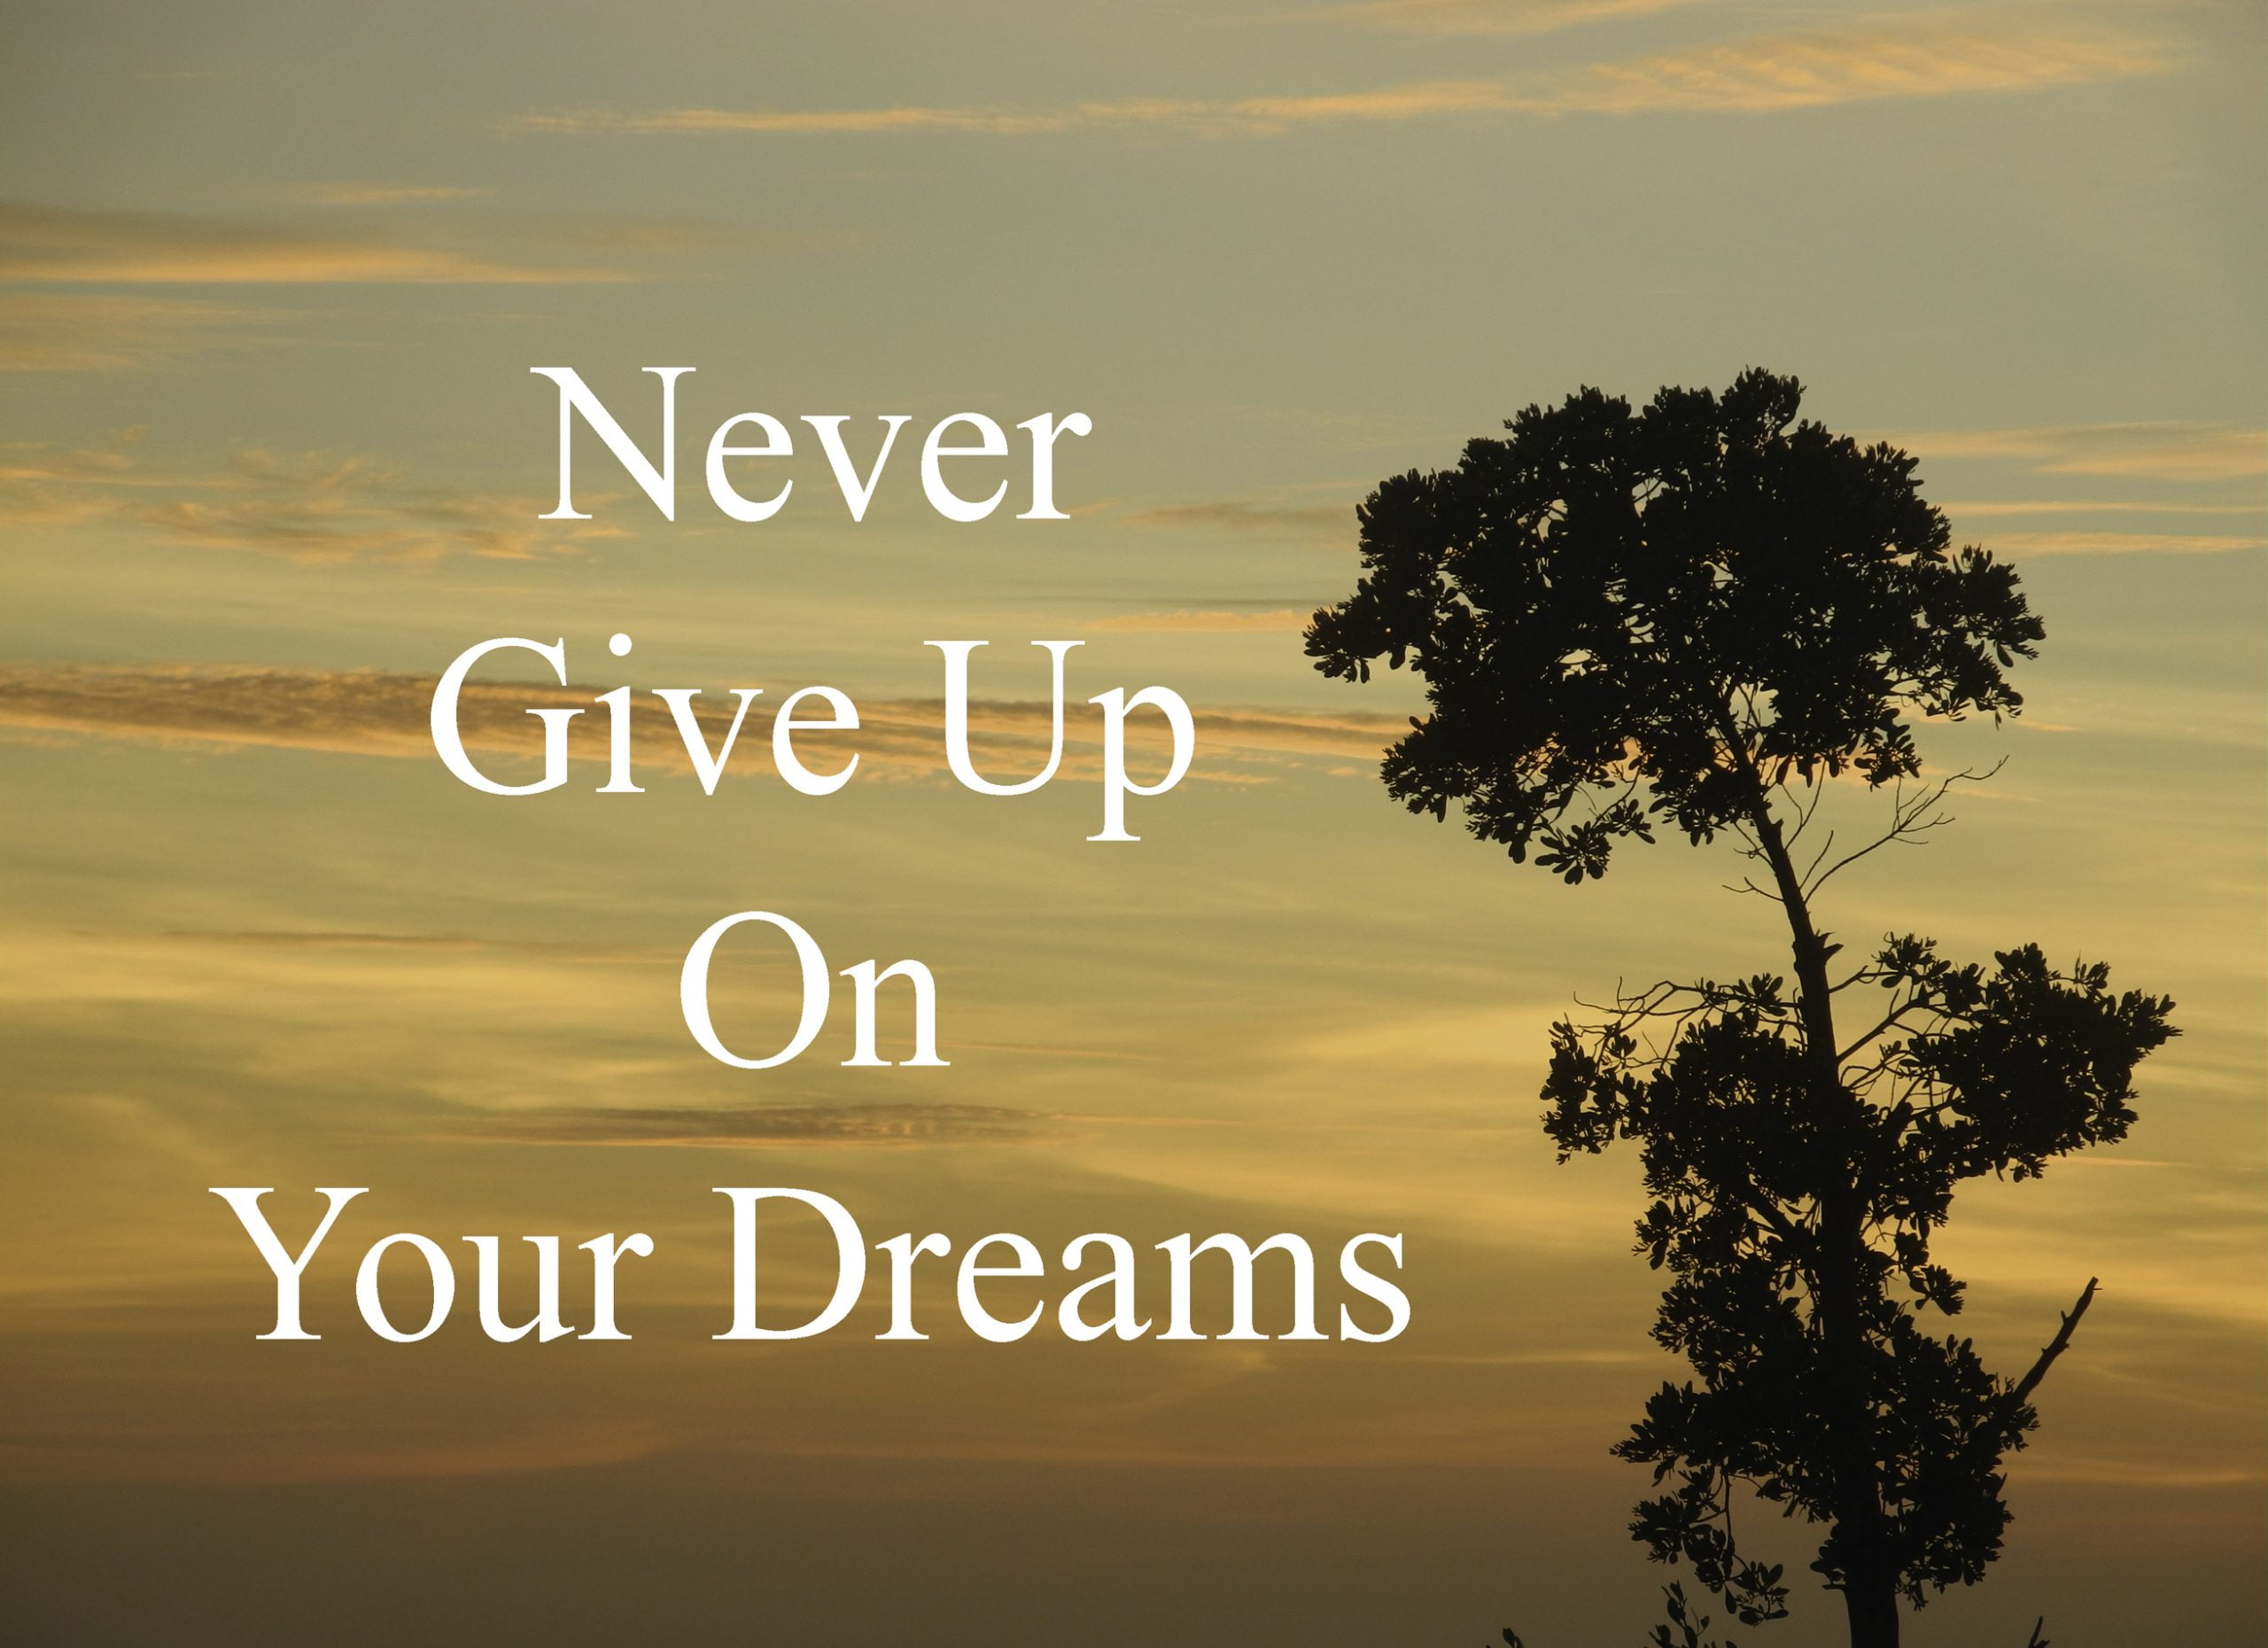 5 Reasons You Should Never Give Up On Your Dreams